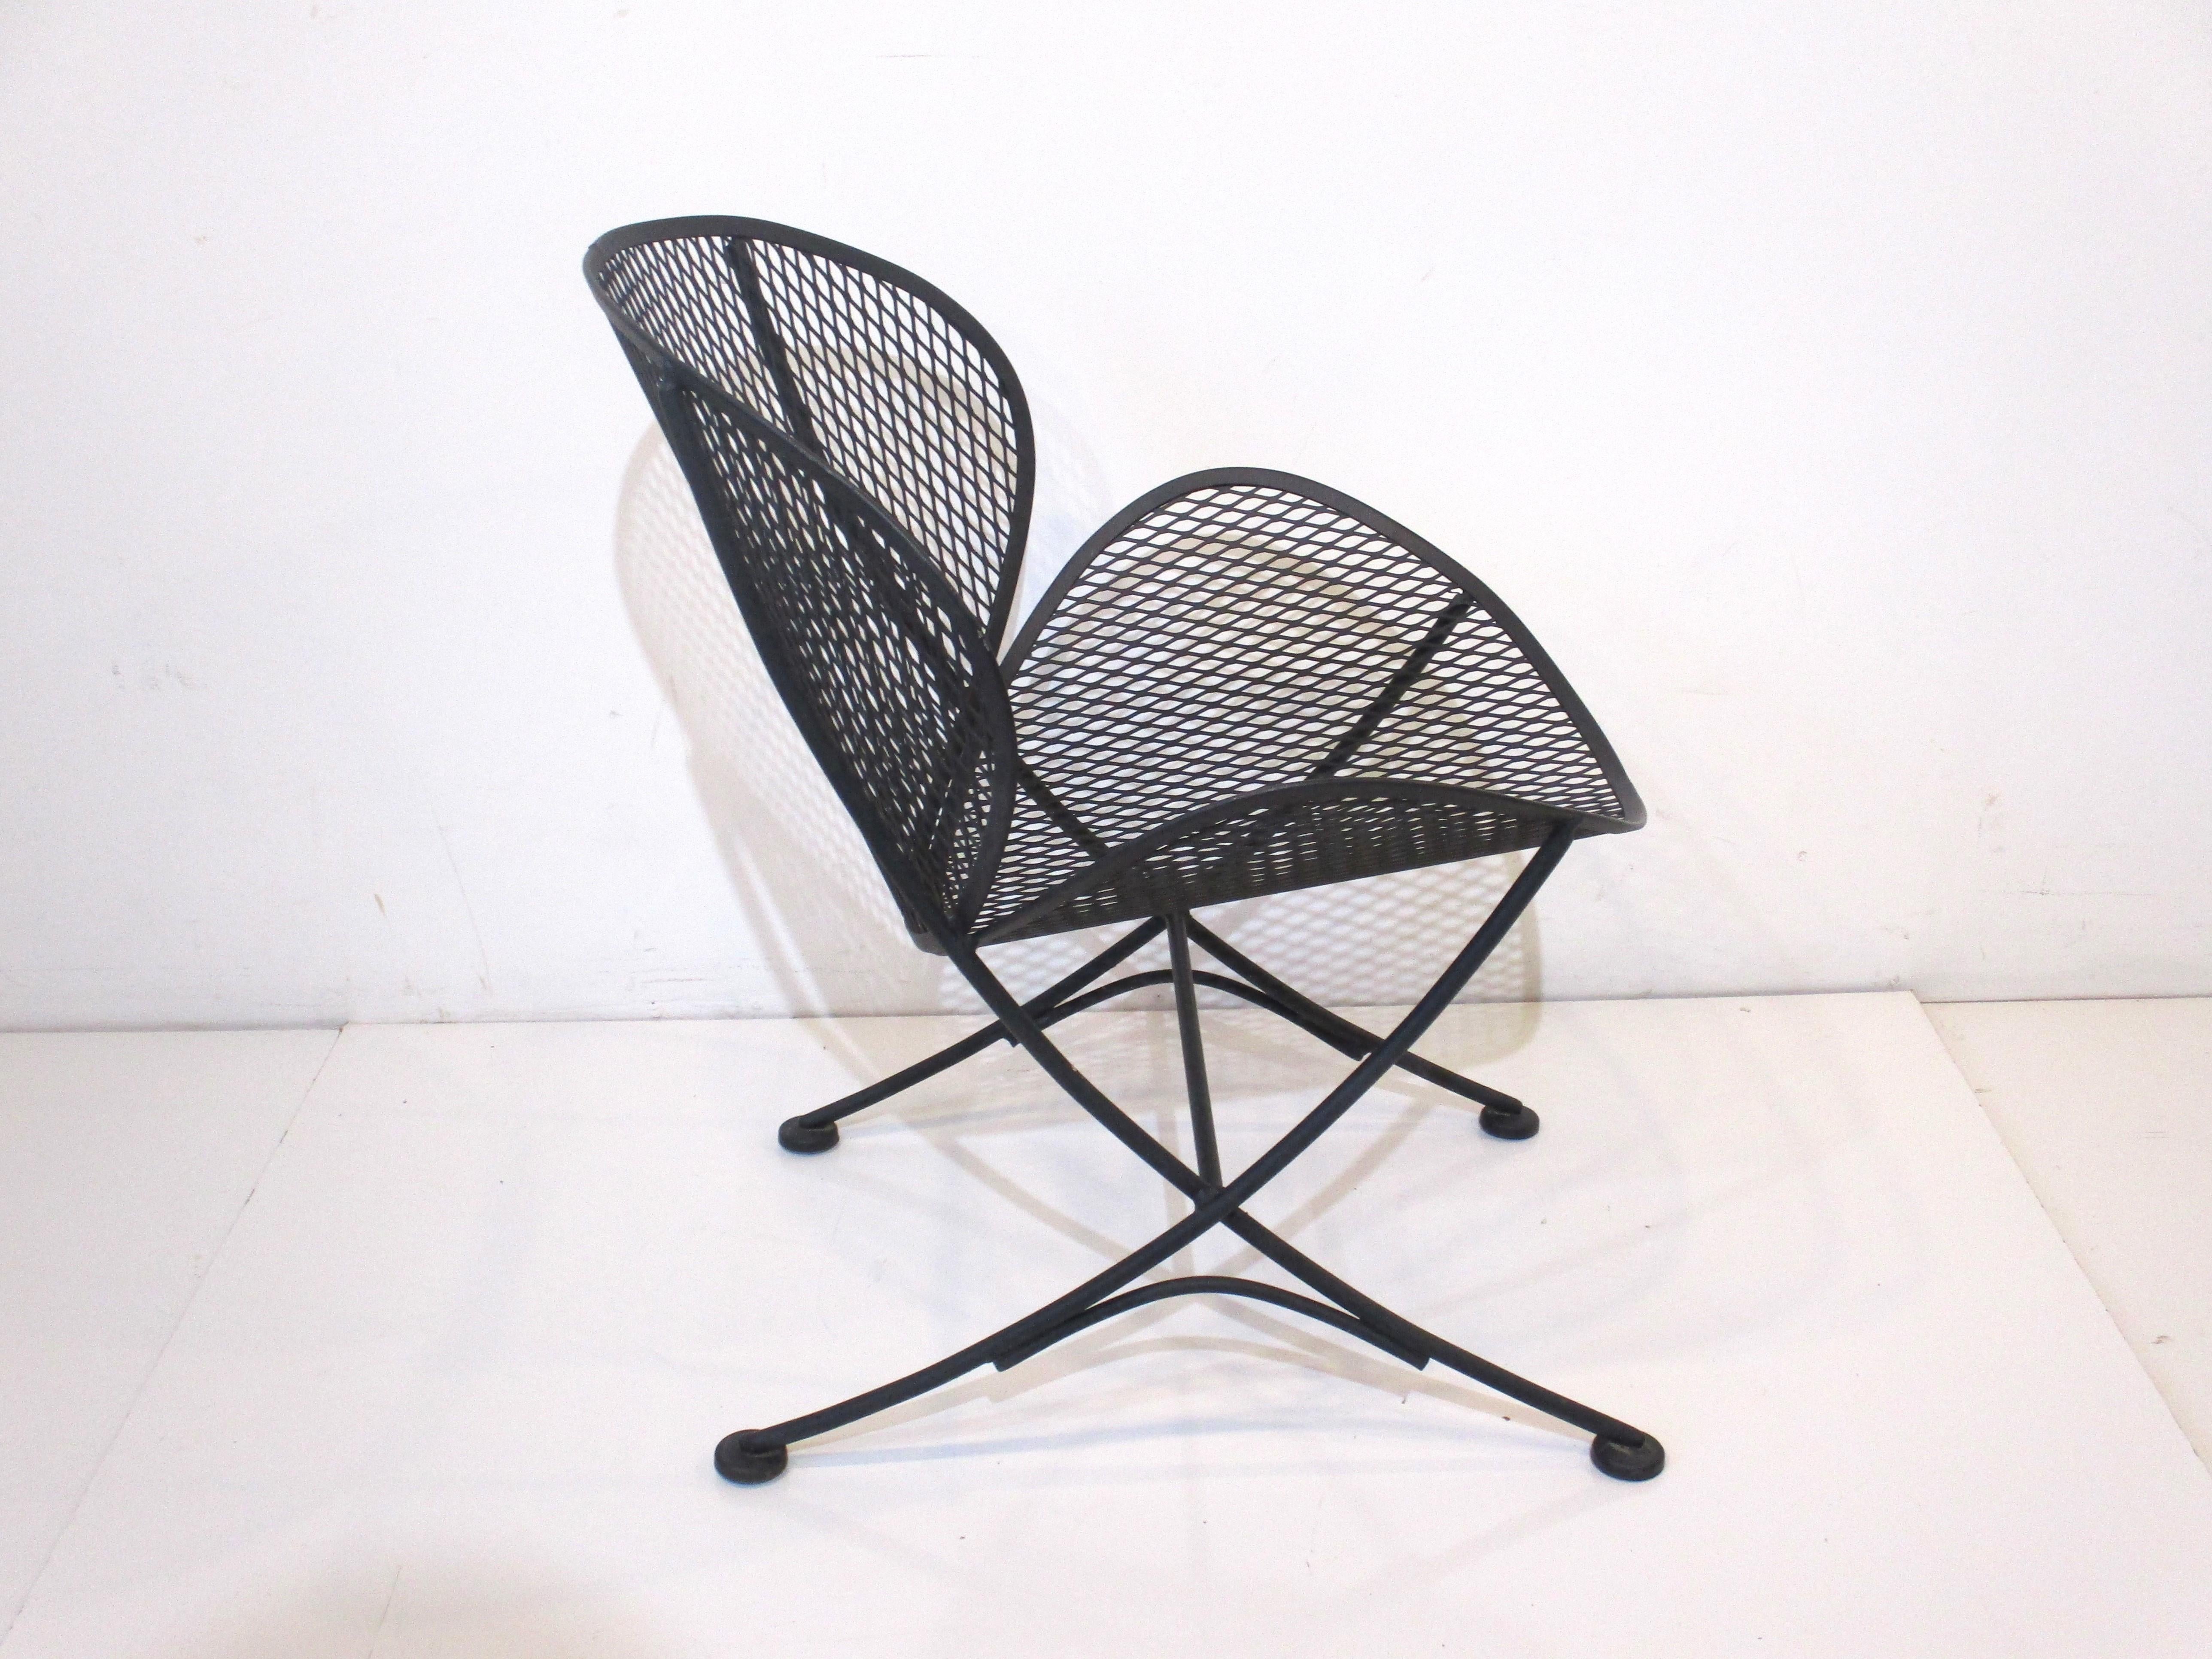 A satin black metal framed indoor or outdoor lounge chair with metal mesh seat sculpturally formed like a orange slice hence the name . The curved legs sit on pads to provide support , manufactured by John Salterini Italy and designed by Maurizio